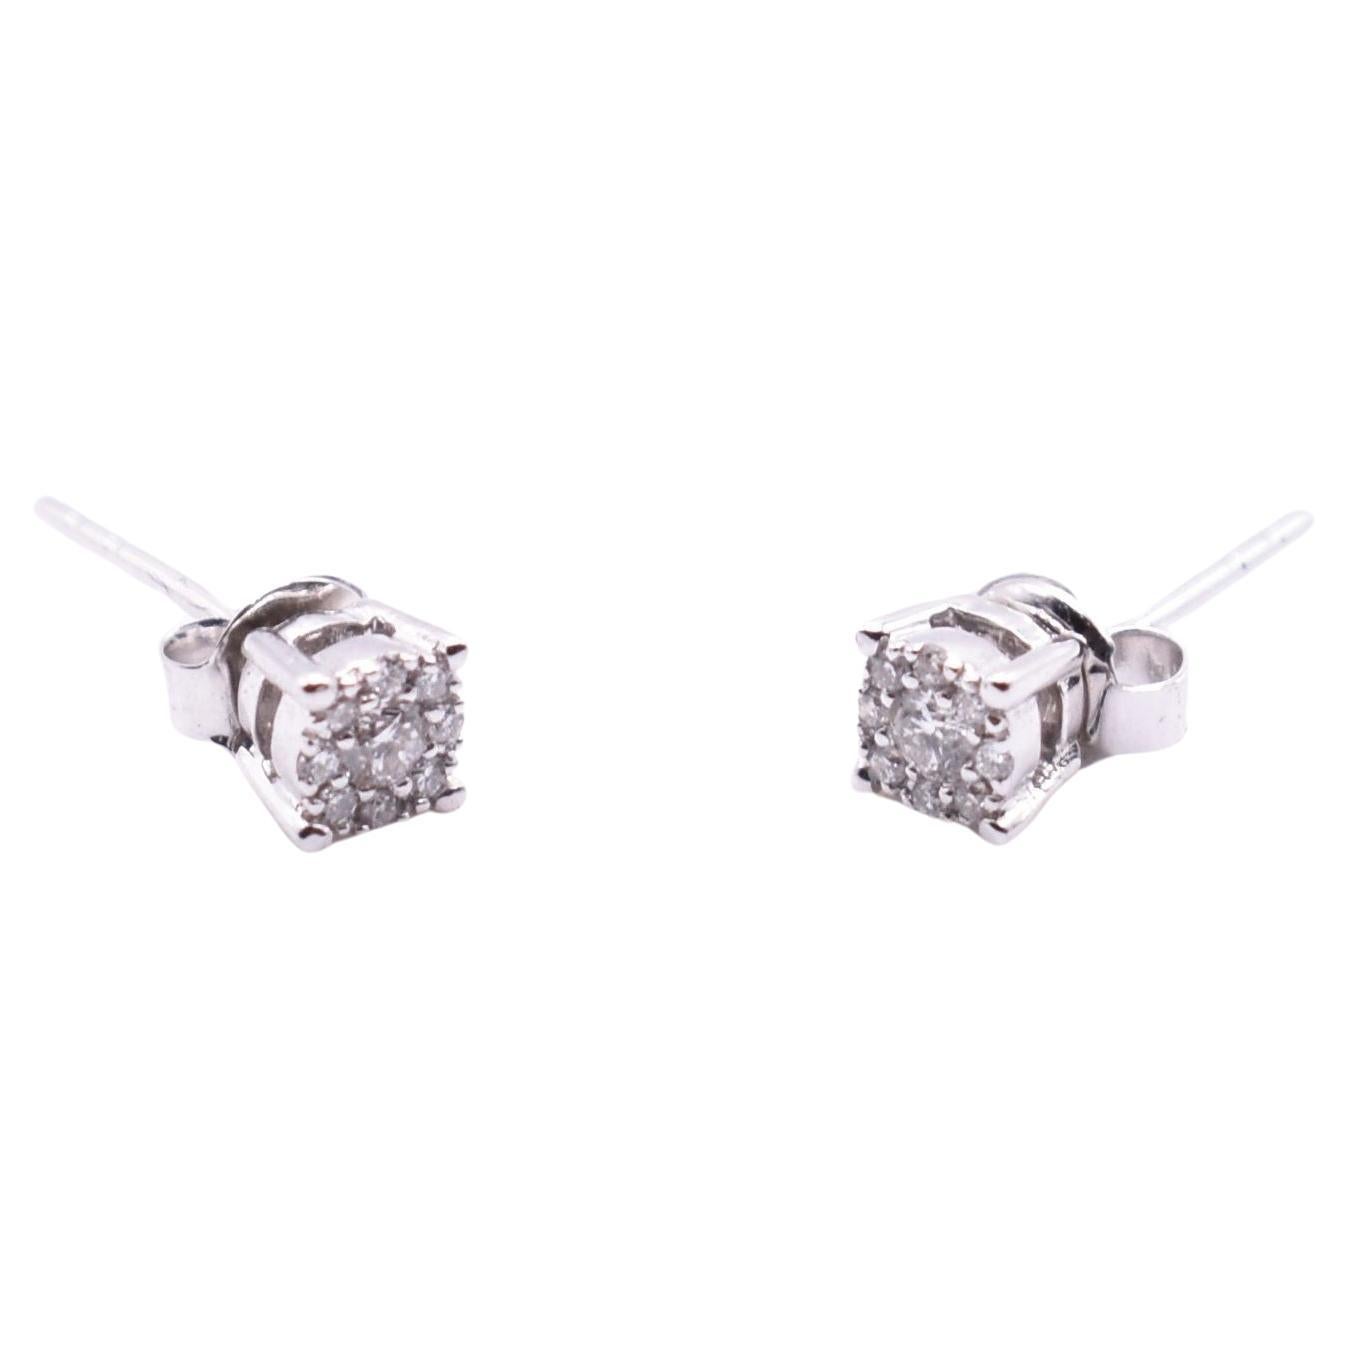 Pair of 18k White Gold Illusion Diamond Stud Earrings For Sale